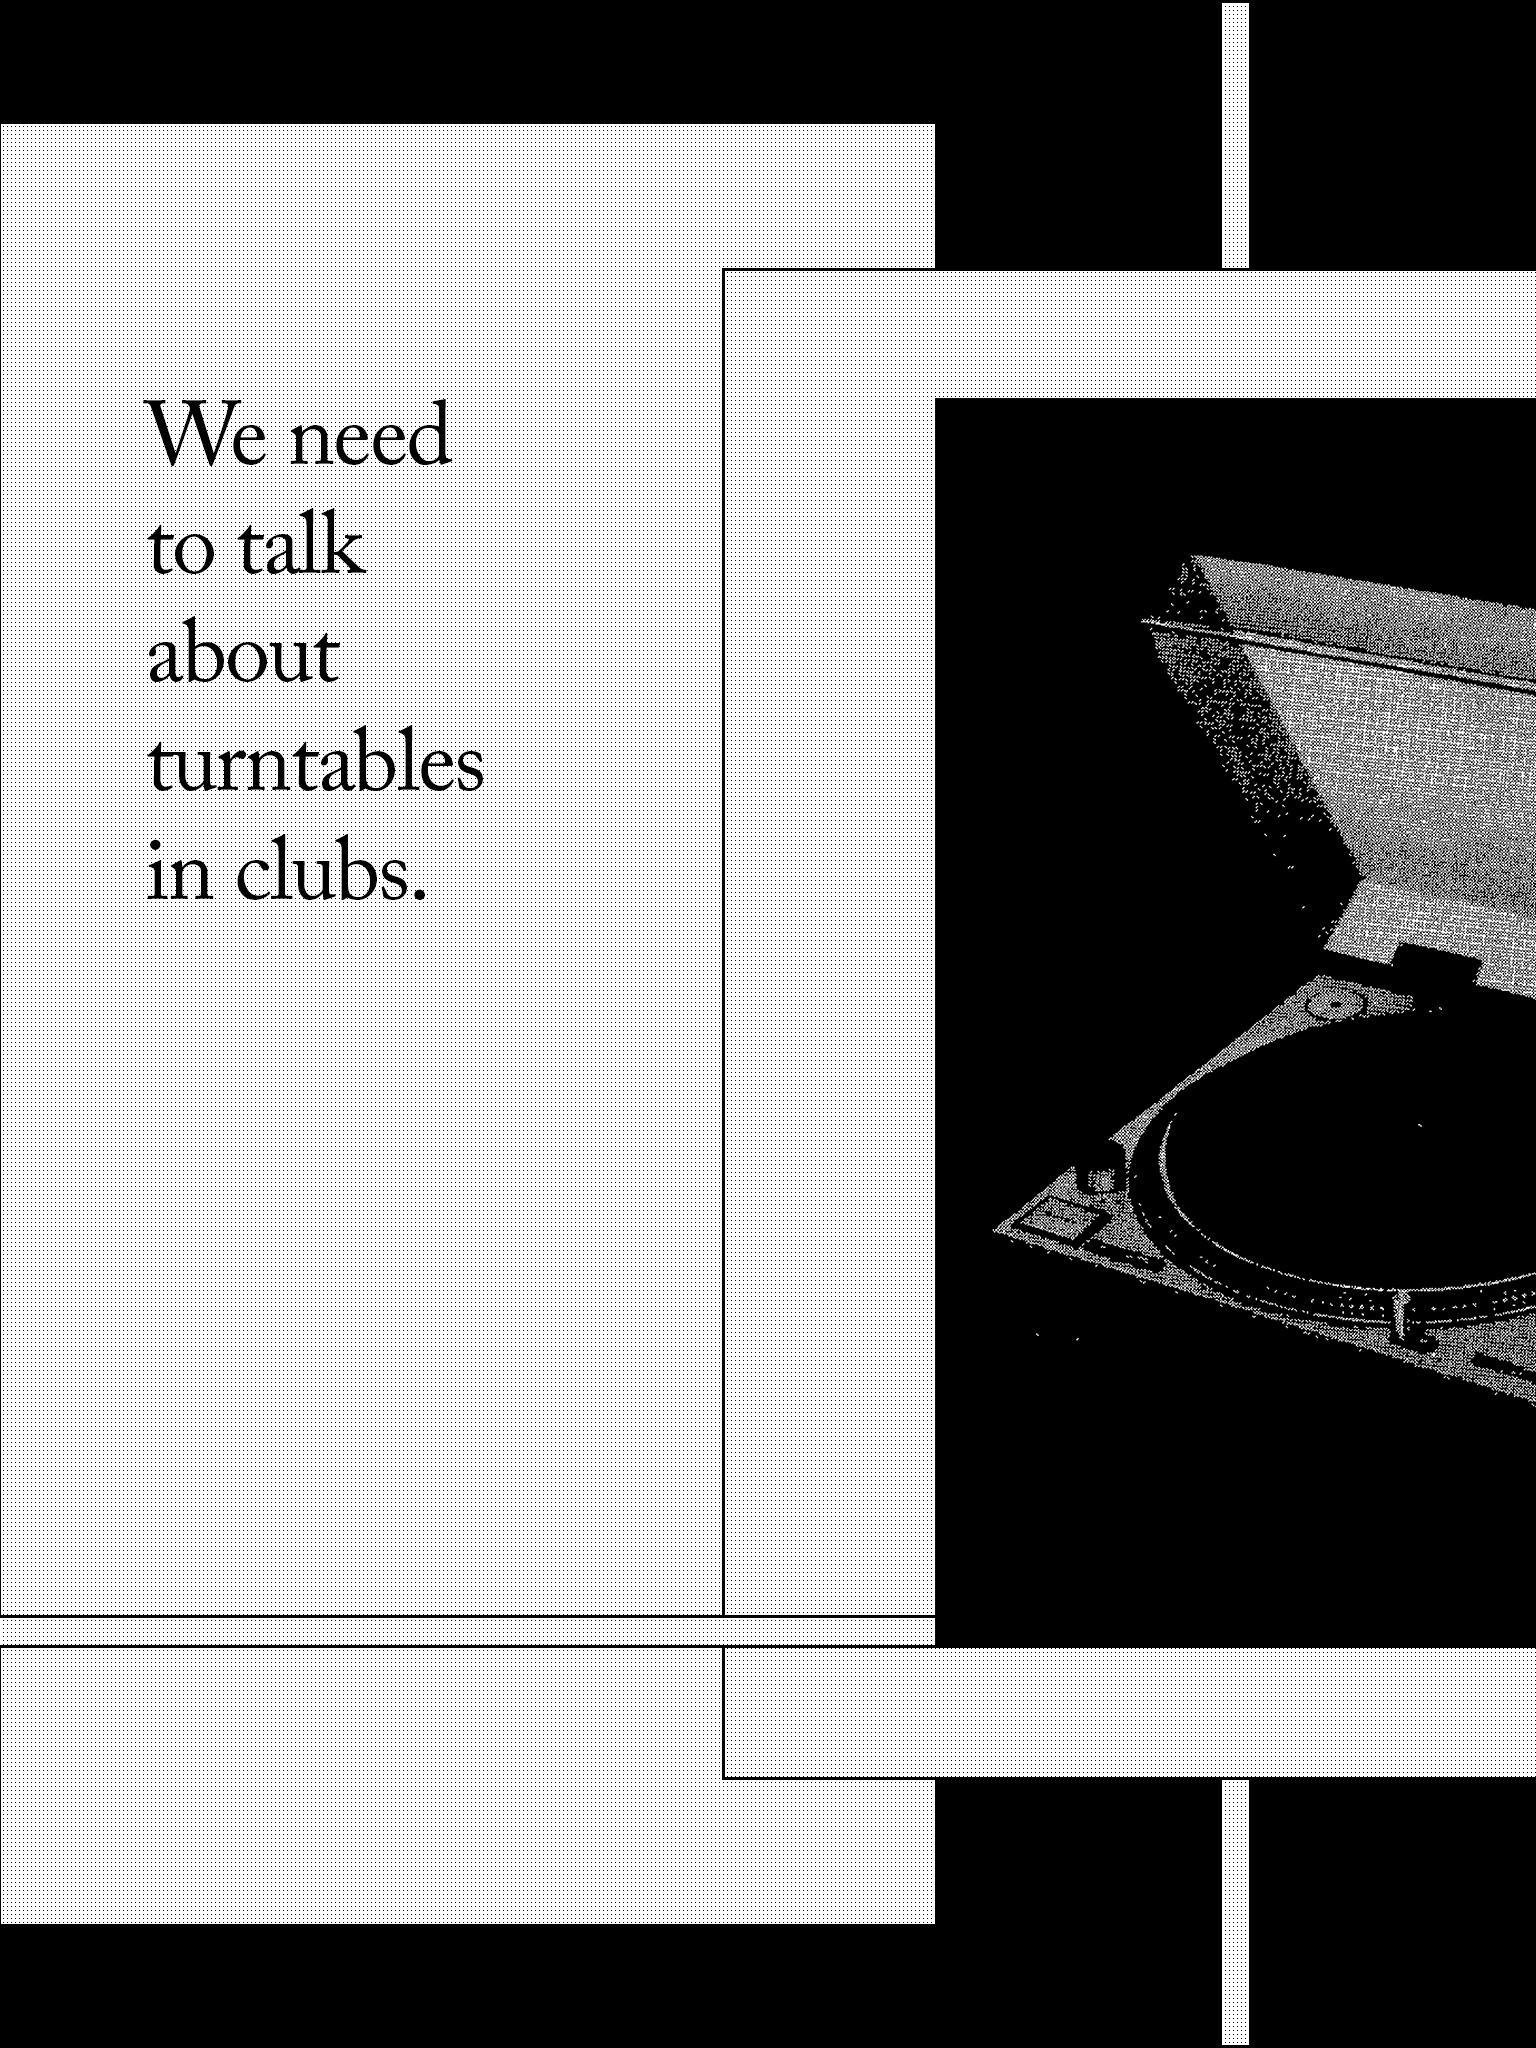 We need to talk about turntables in clubs